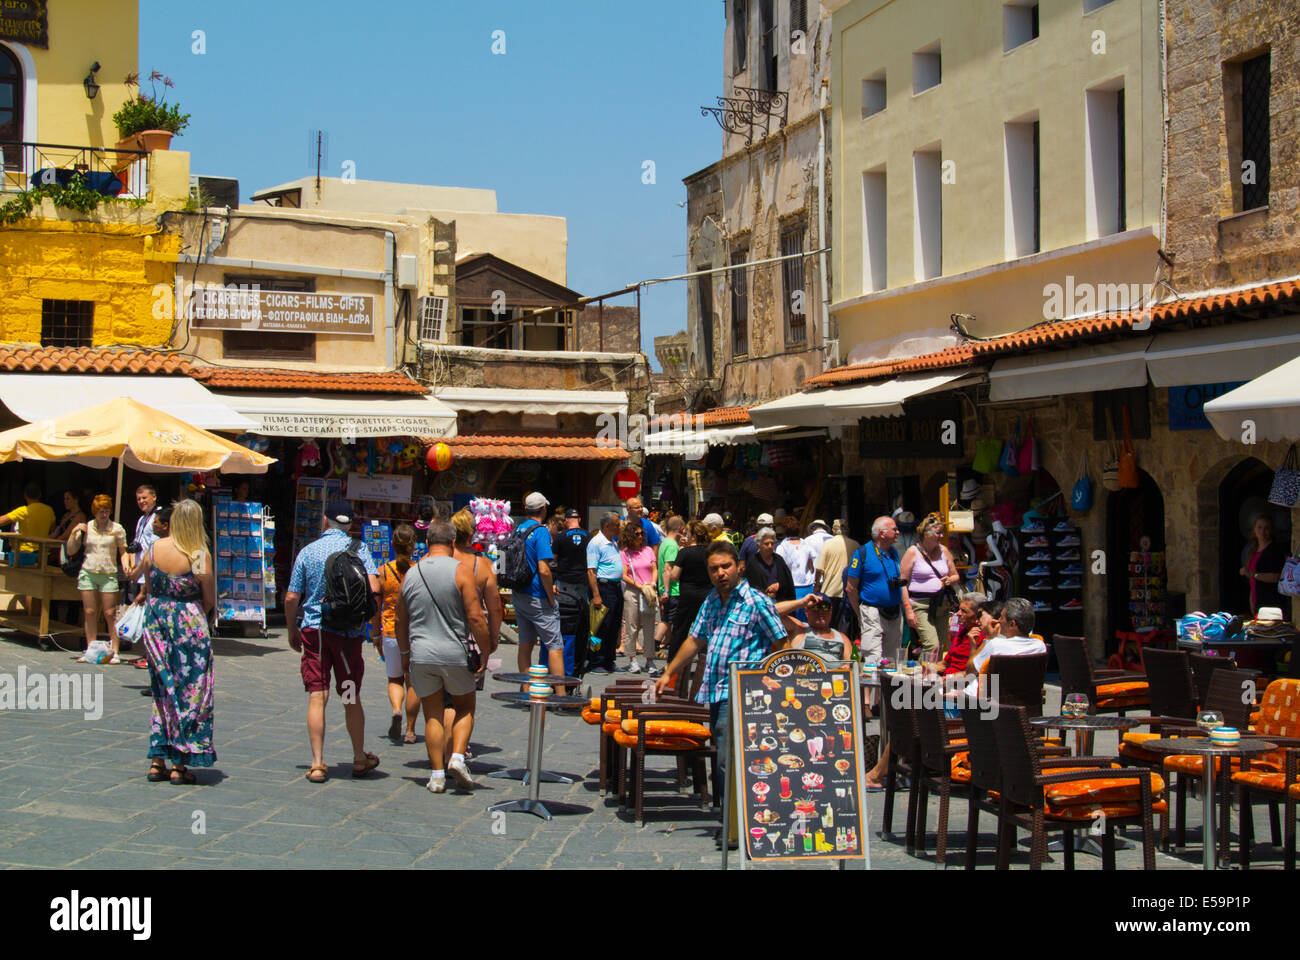 Everon Martyron square, old town, Rhodes town, Rhodes island, Dodecanese islands, Greece, Europe Stock Photo